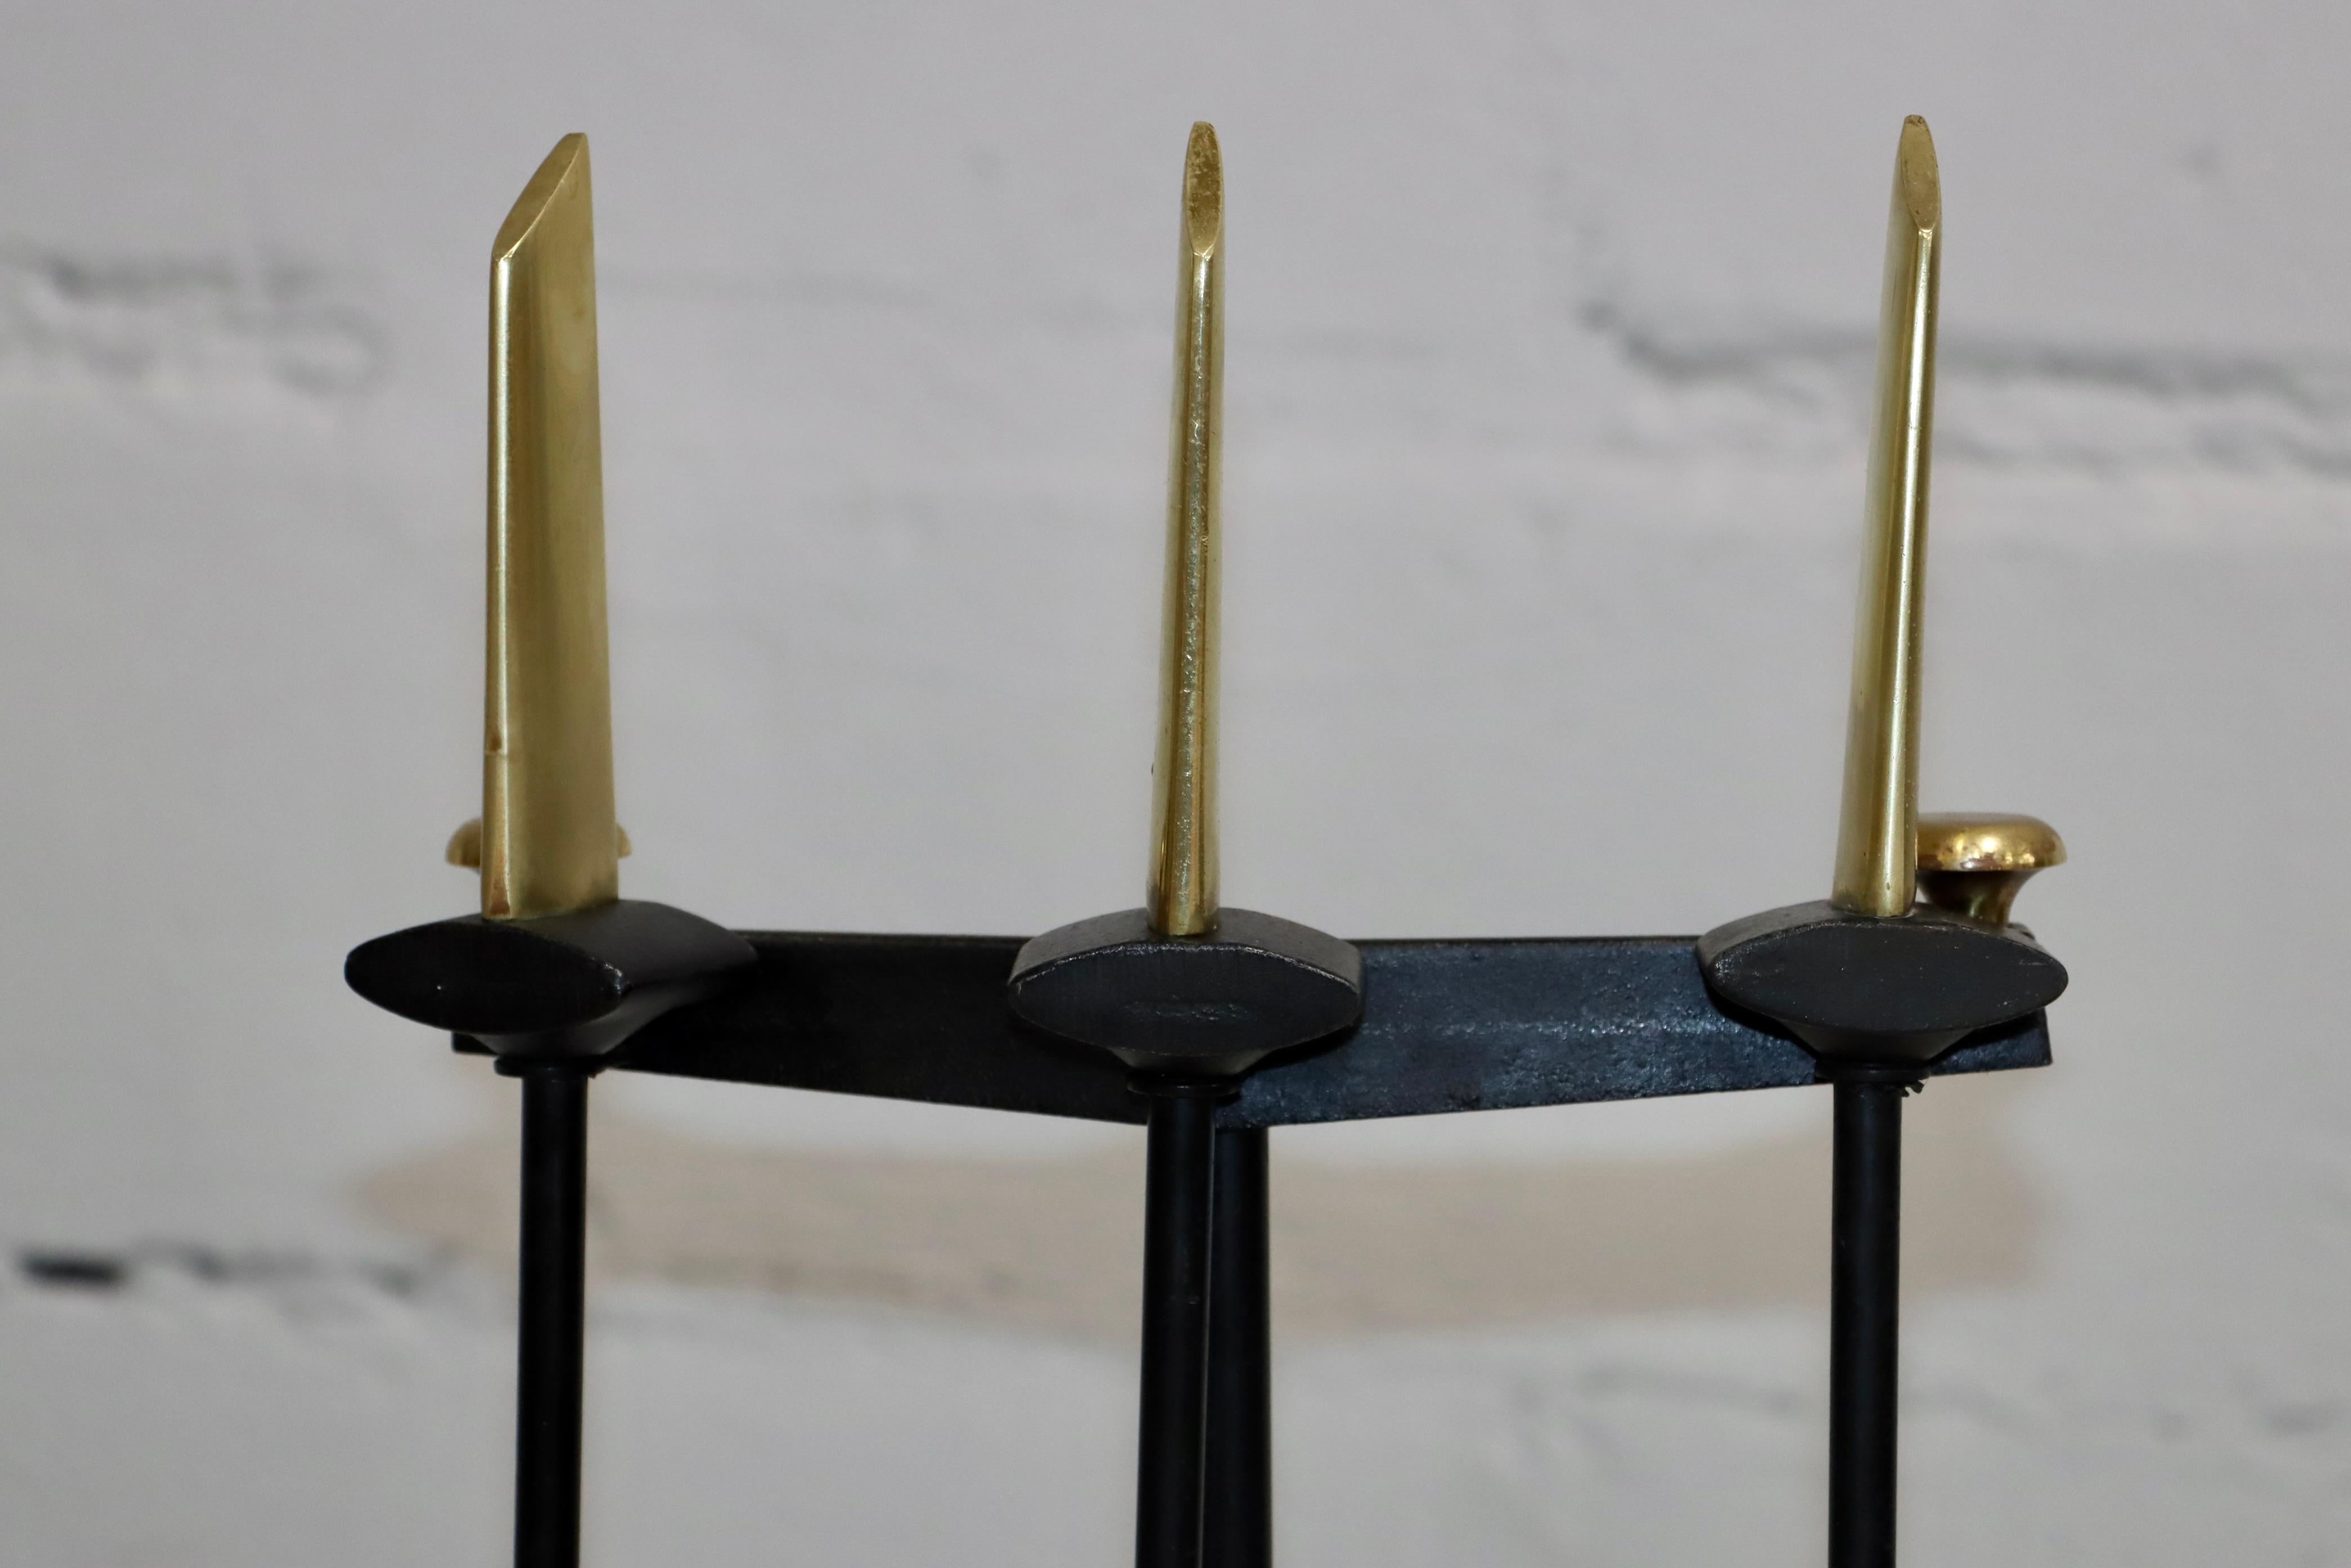 1960's mid-century modern brass and iron 3 piece fireplace tools with brass and iron tripod stand designed by Donald Deskey, in vintage original condition with some wear and patina due to age and use.